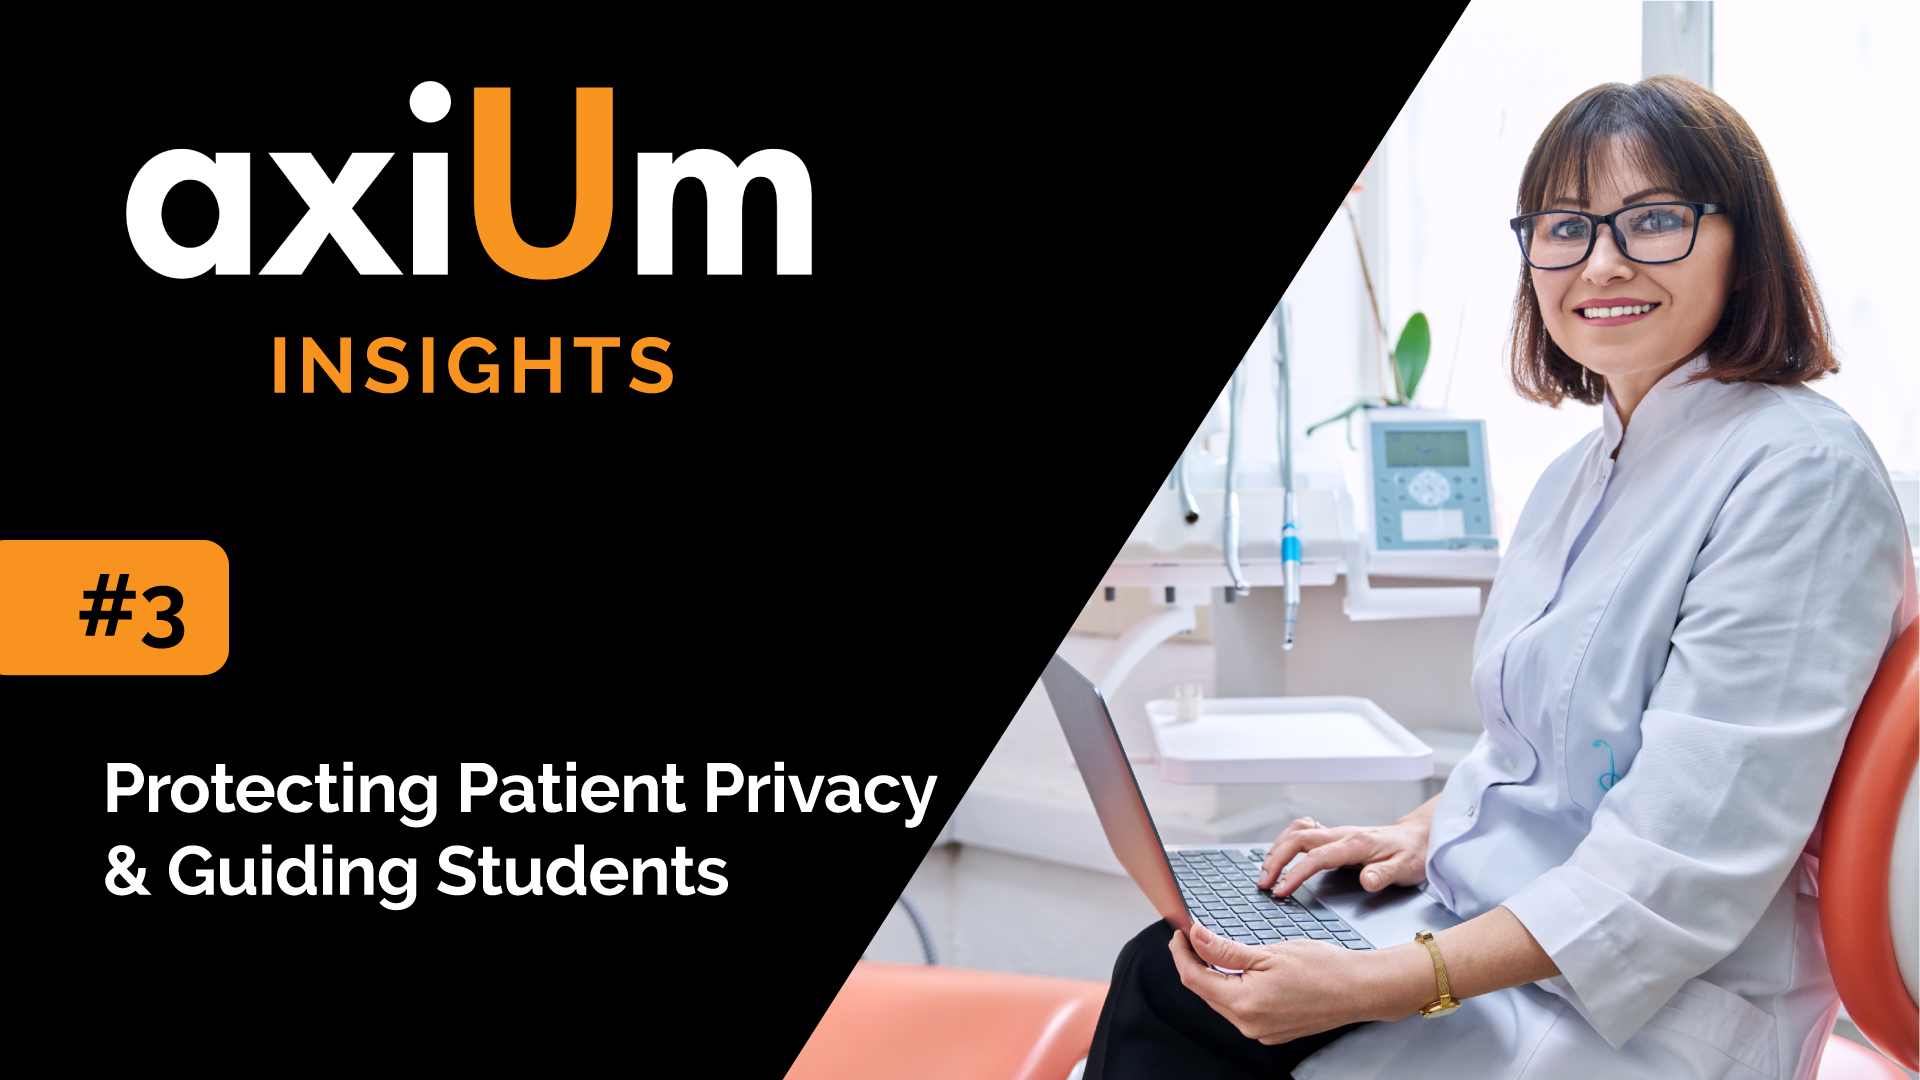 axiUm Insights #3 – Protecting Patient Privacy and Guiding Students